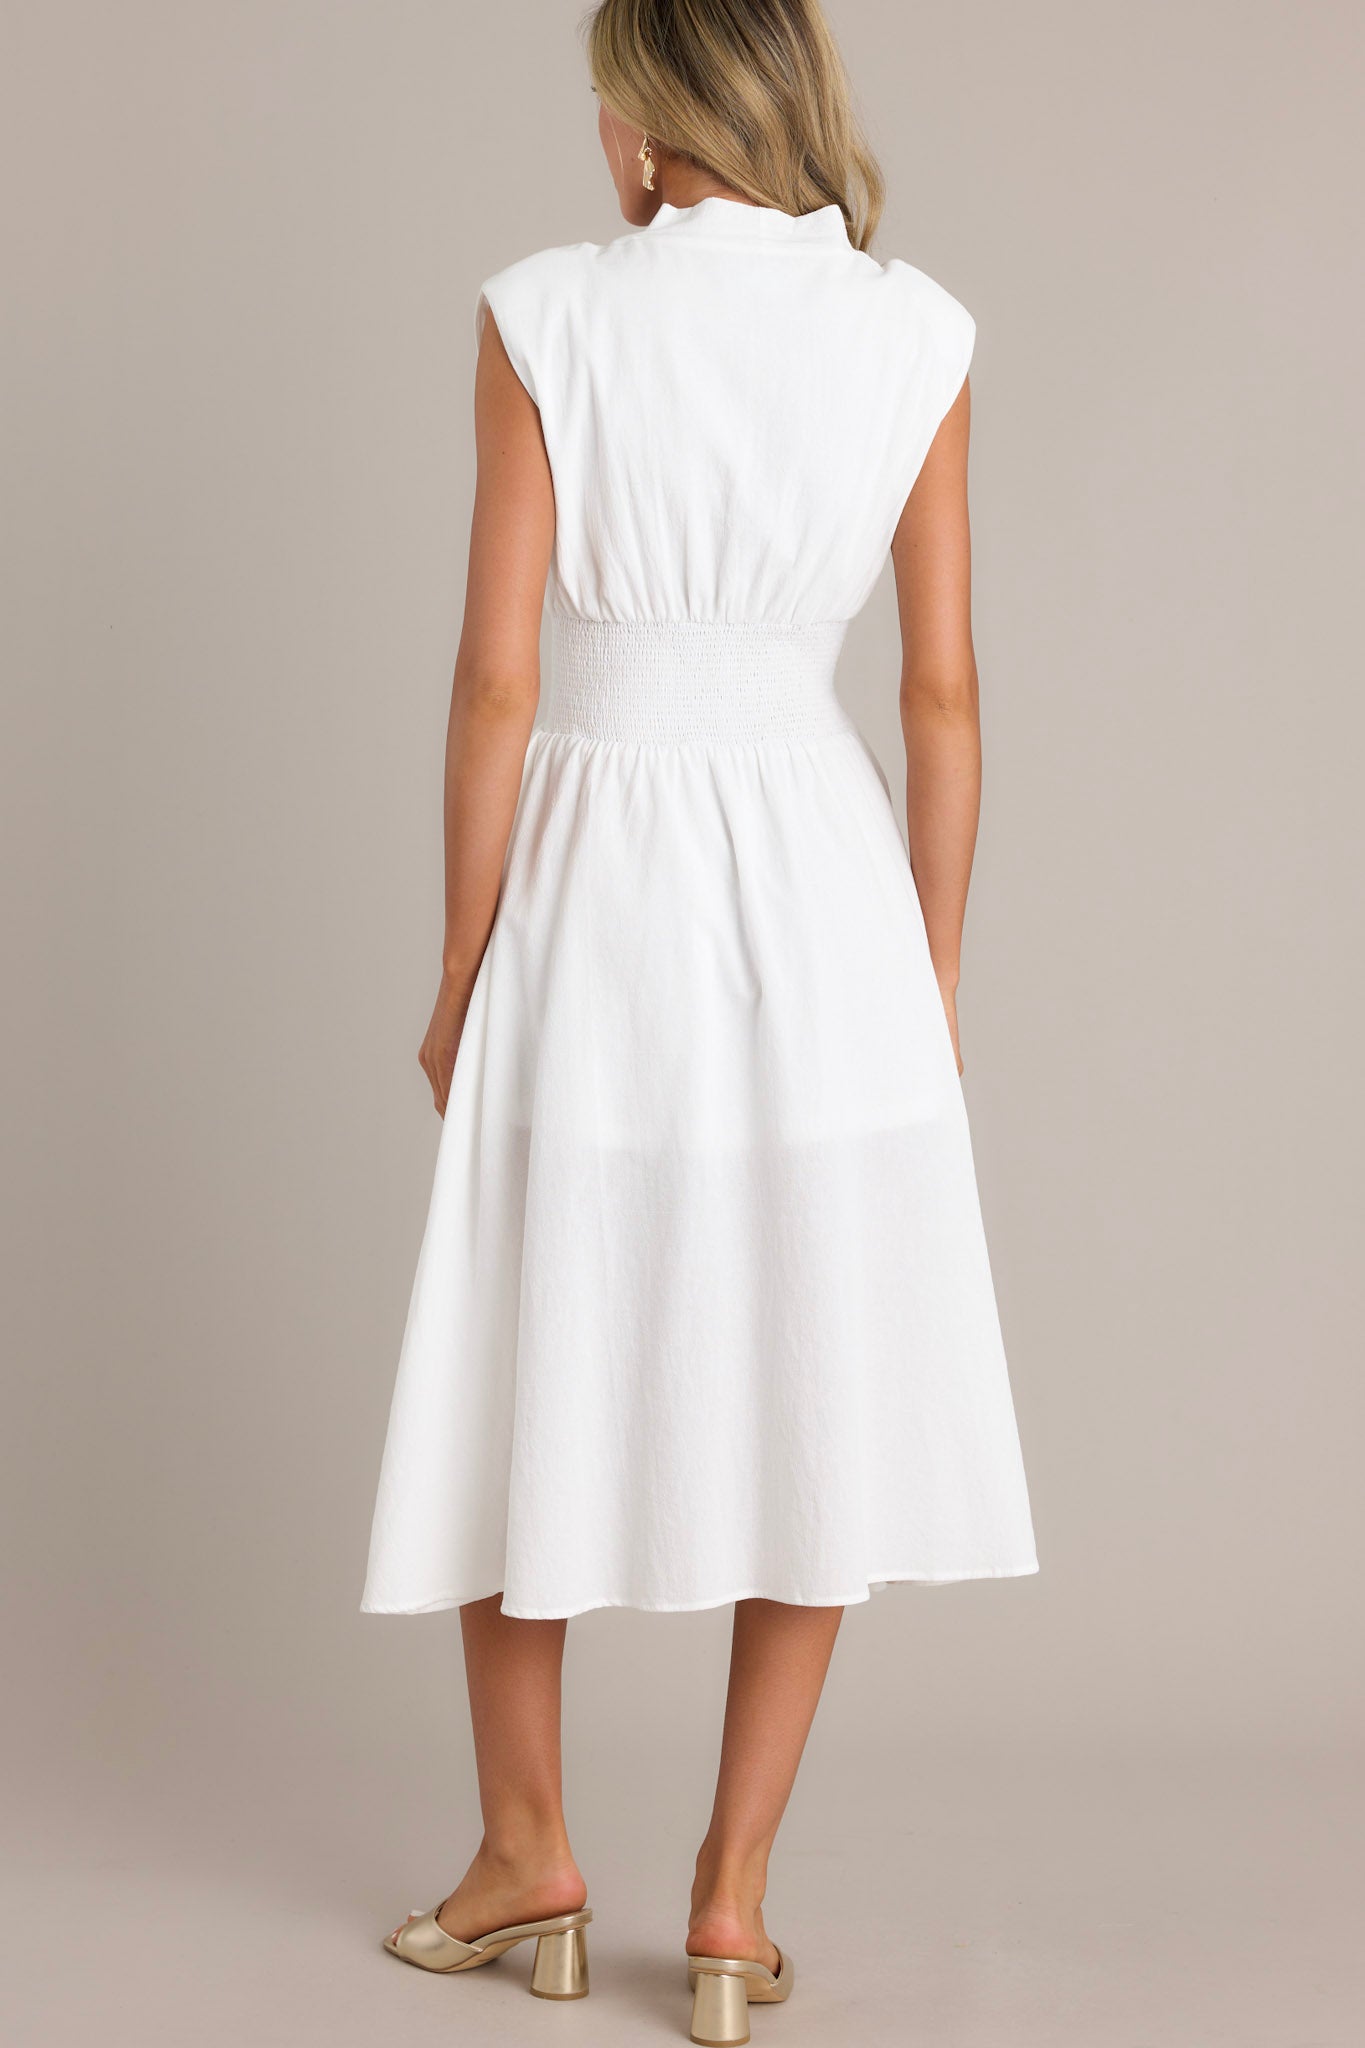 Back view of a white midi dress featuring a plain design, showing the shoulder padding and flowing silhouette.